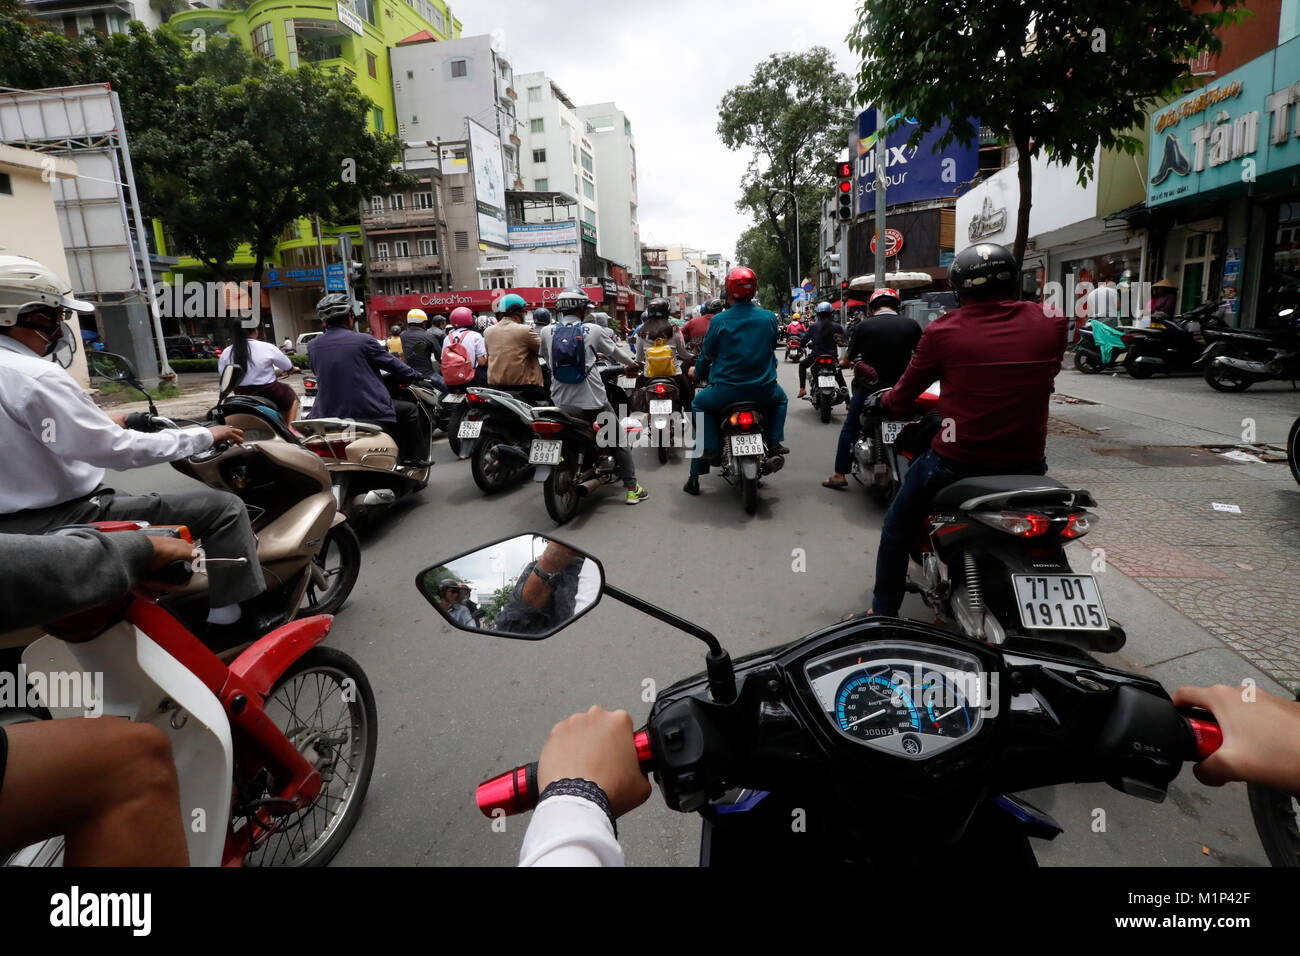 Vietnamese people on motorbikes in traffic, Ho Chi Minh City, Vietnam, Indochina, Southeast Asia, Asia Stock Photo